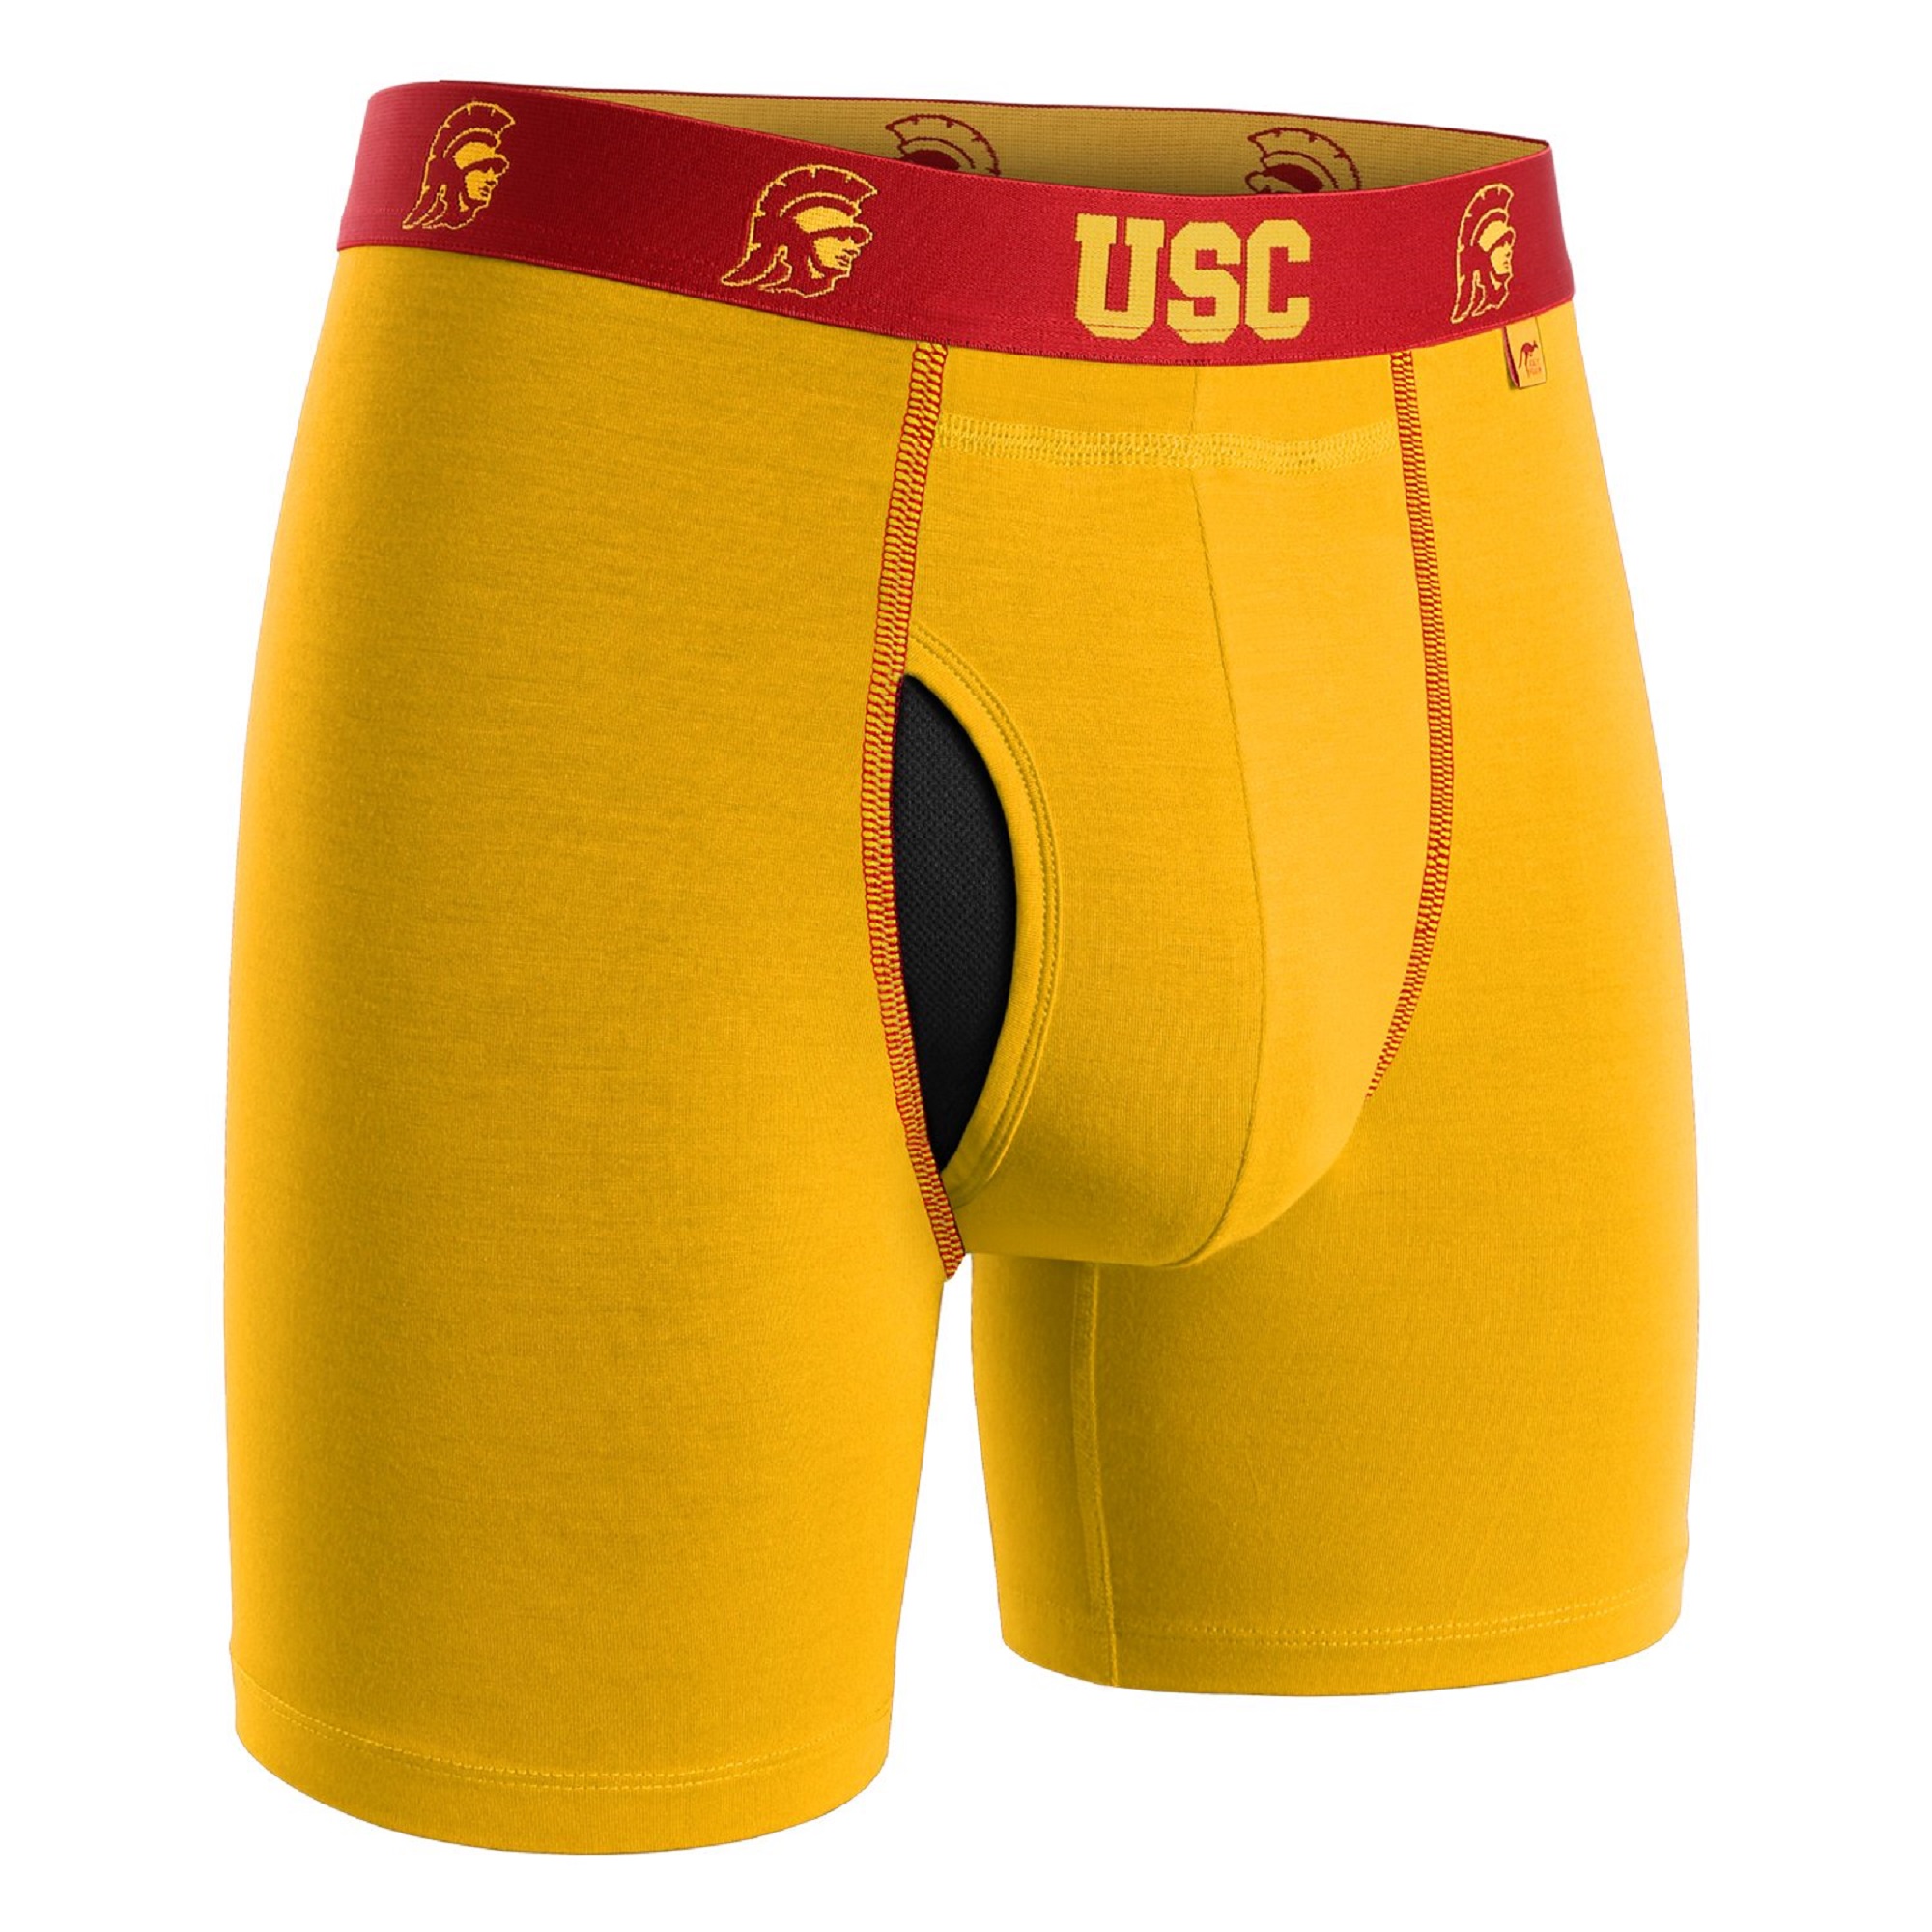 2UNDR NCAA Team Colors Men's Swing Shift Boxers (Usc Athletic Gold, Small) - image 1 of 5